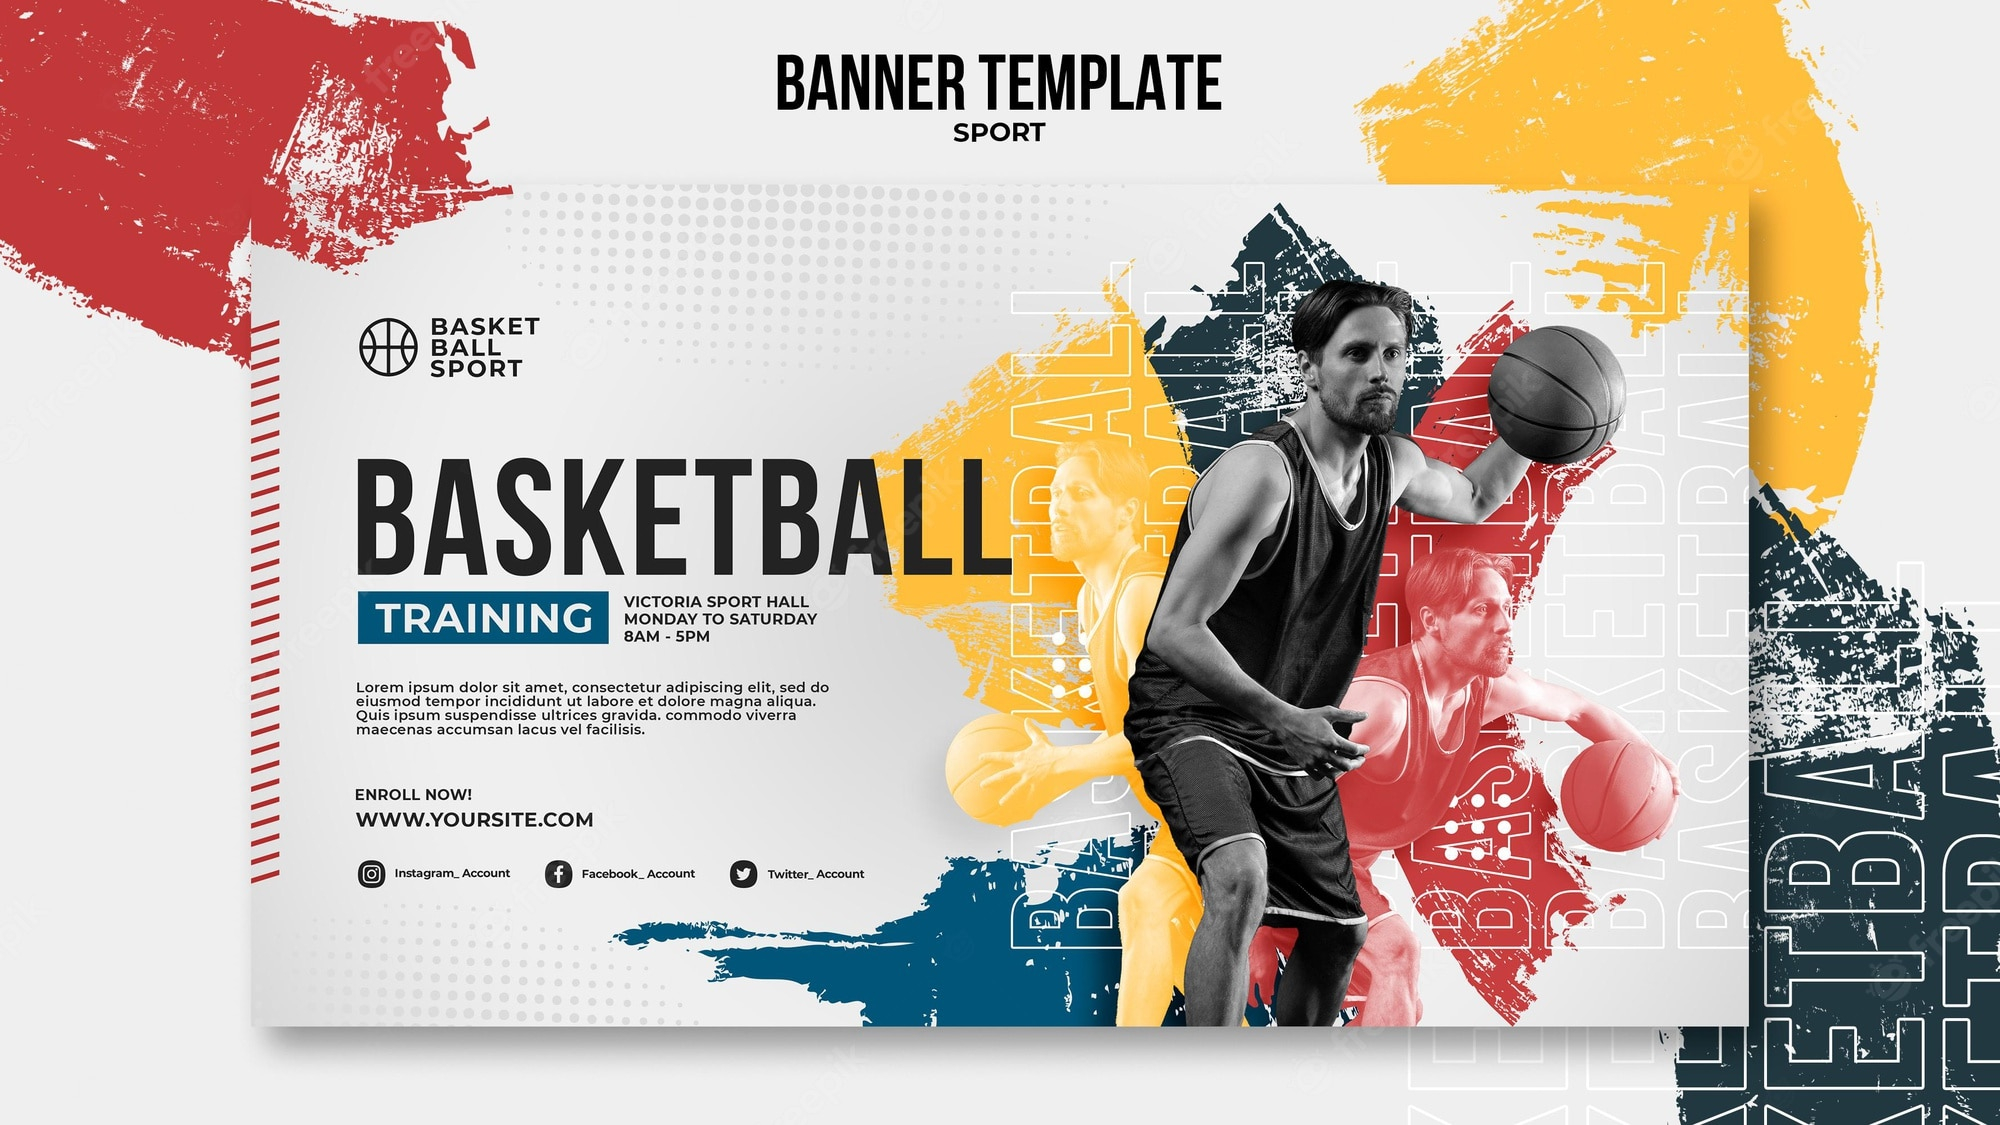 Sports Banner Images  Free Vectors, Stock Photos & PSD In Sports Banner Templates